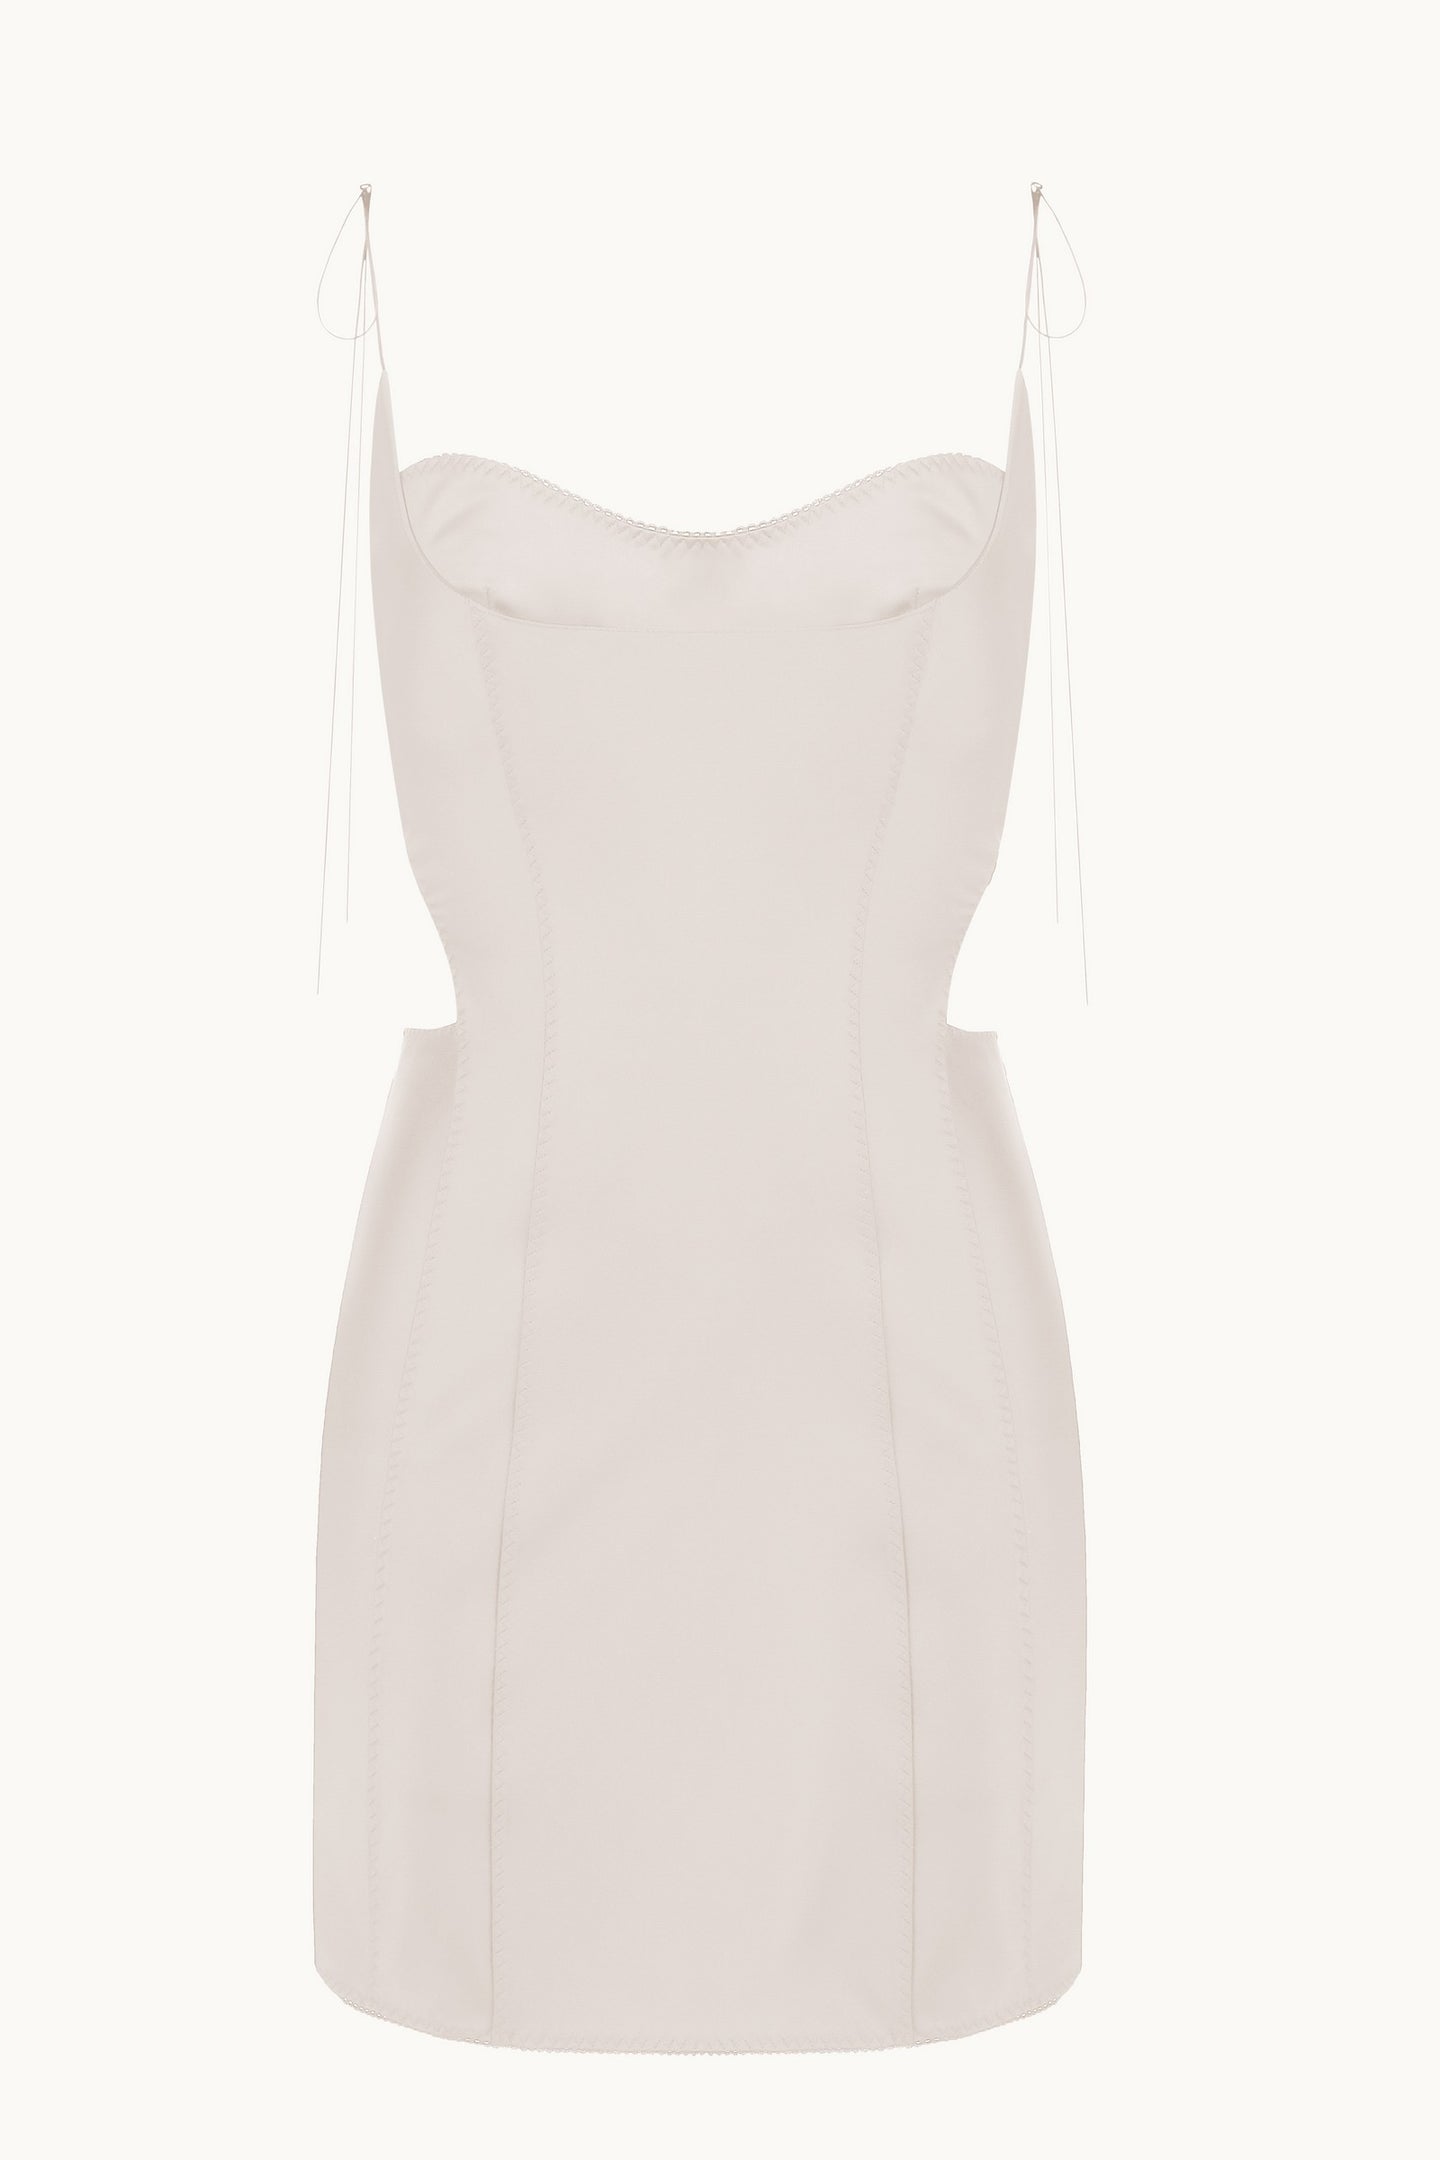 Vivienne ivory dress front view